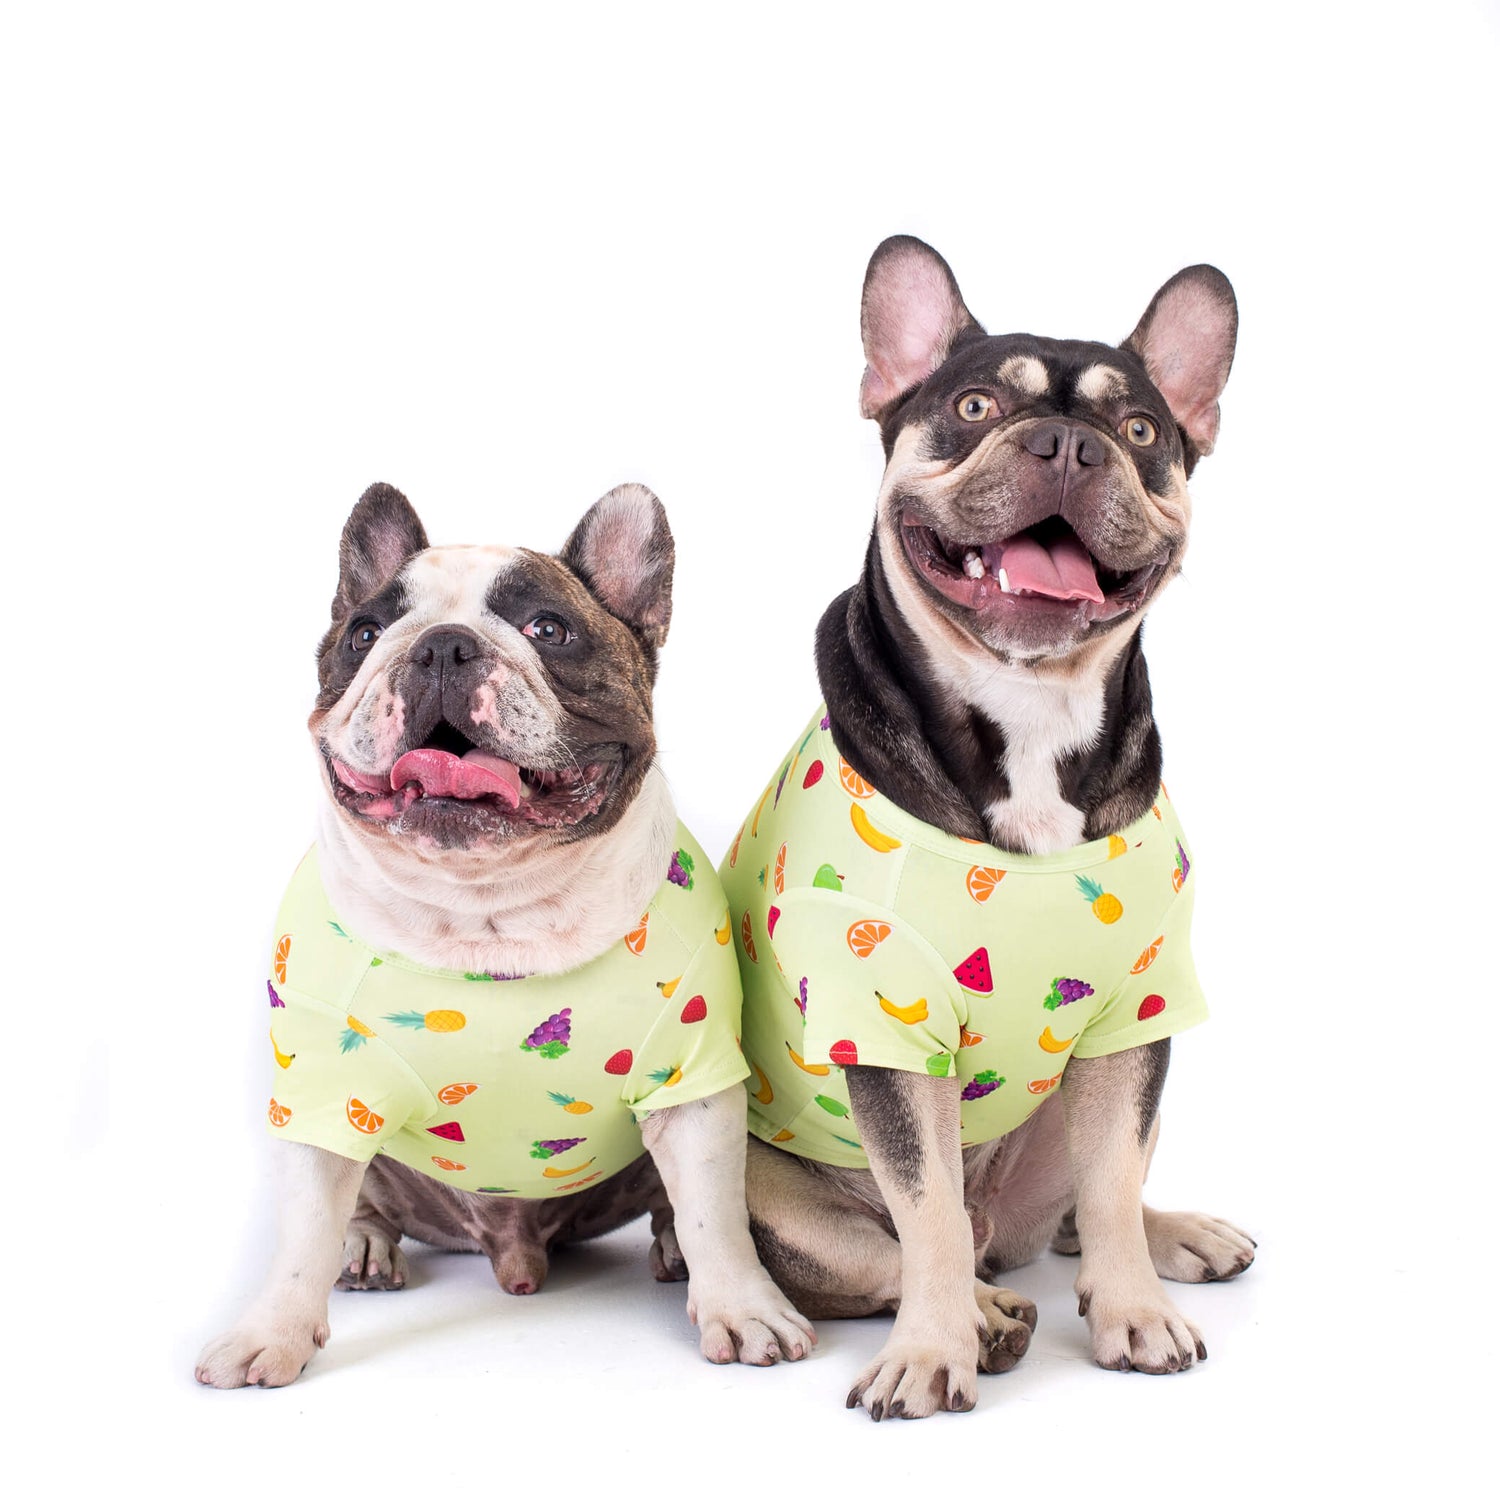 Two cheerful French Bulldogs radiating happiness as they showcase their contagious joy while wearing Feelin'Fruity dog shirts, adding a splash of fun and cheerfulness to their delightful personalities.